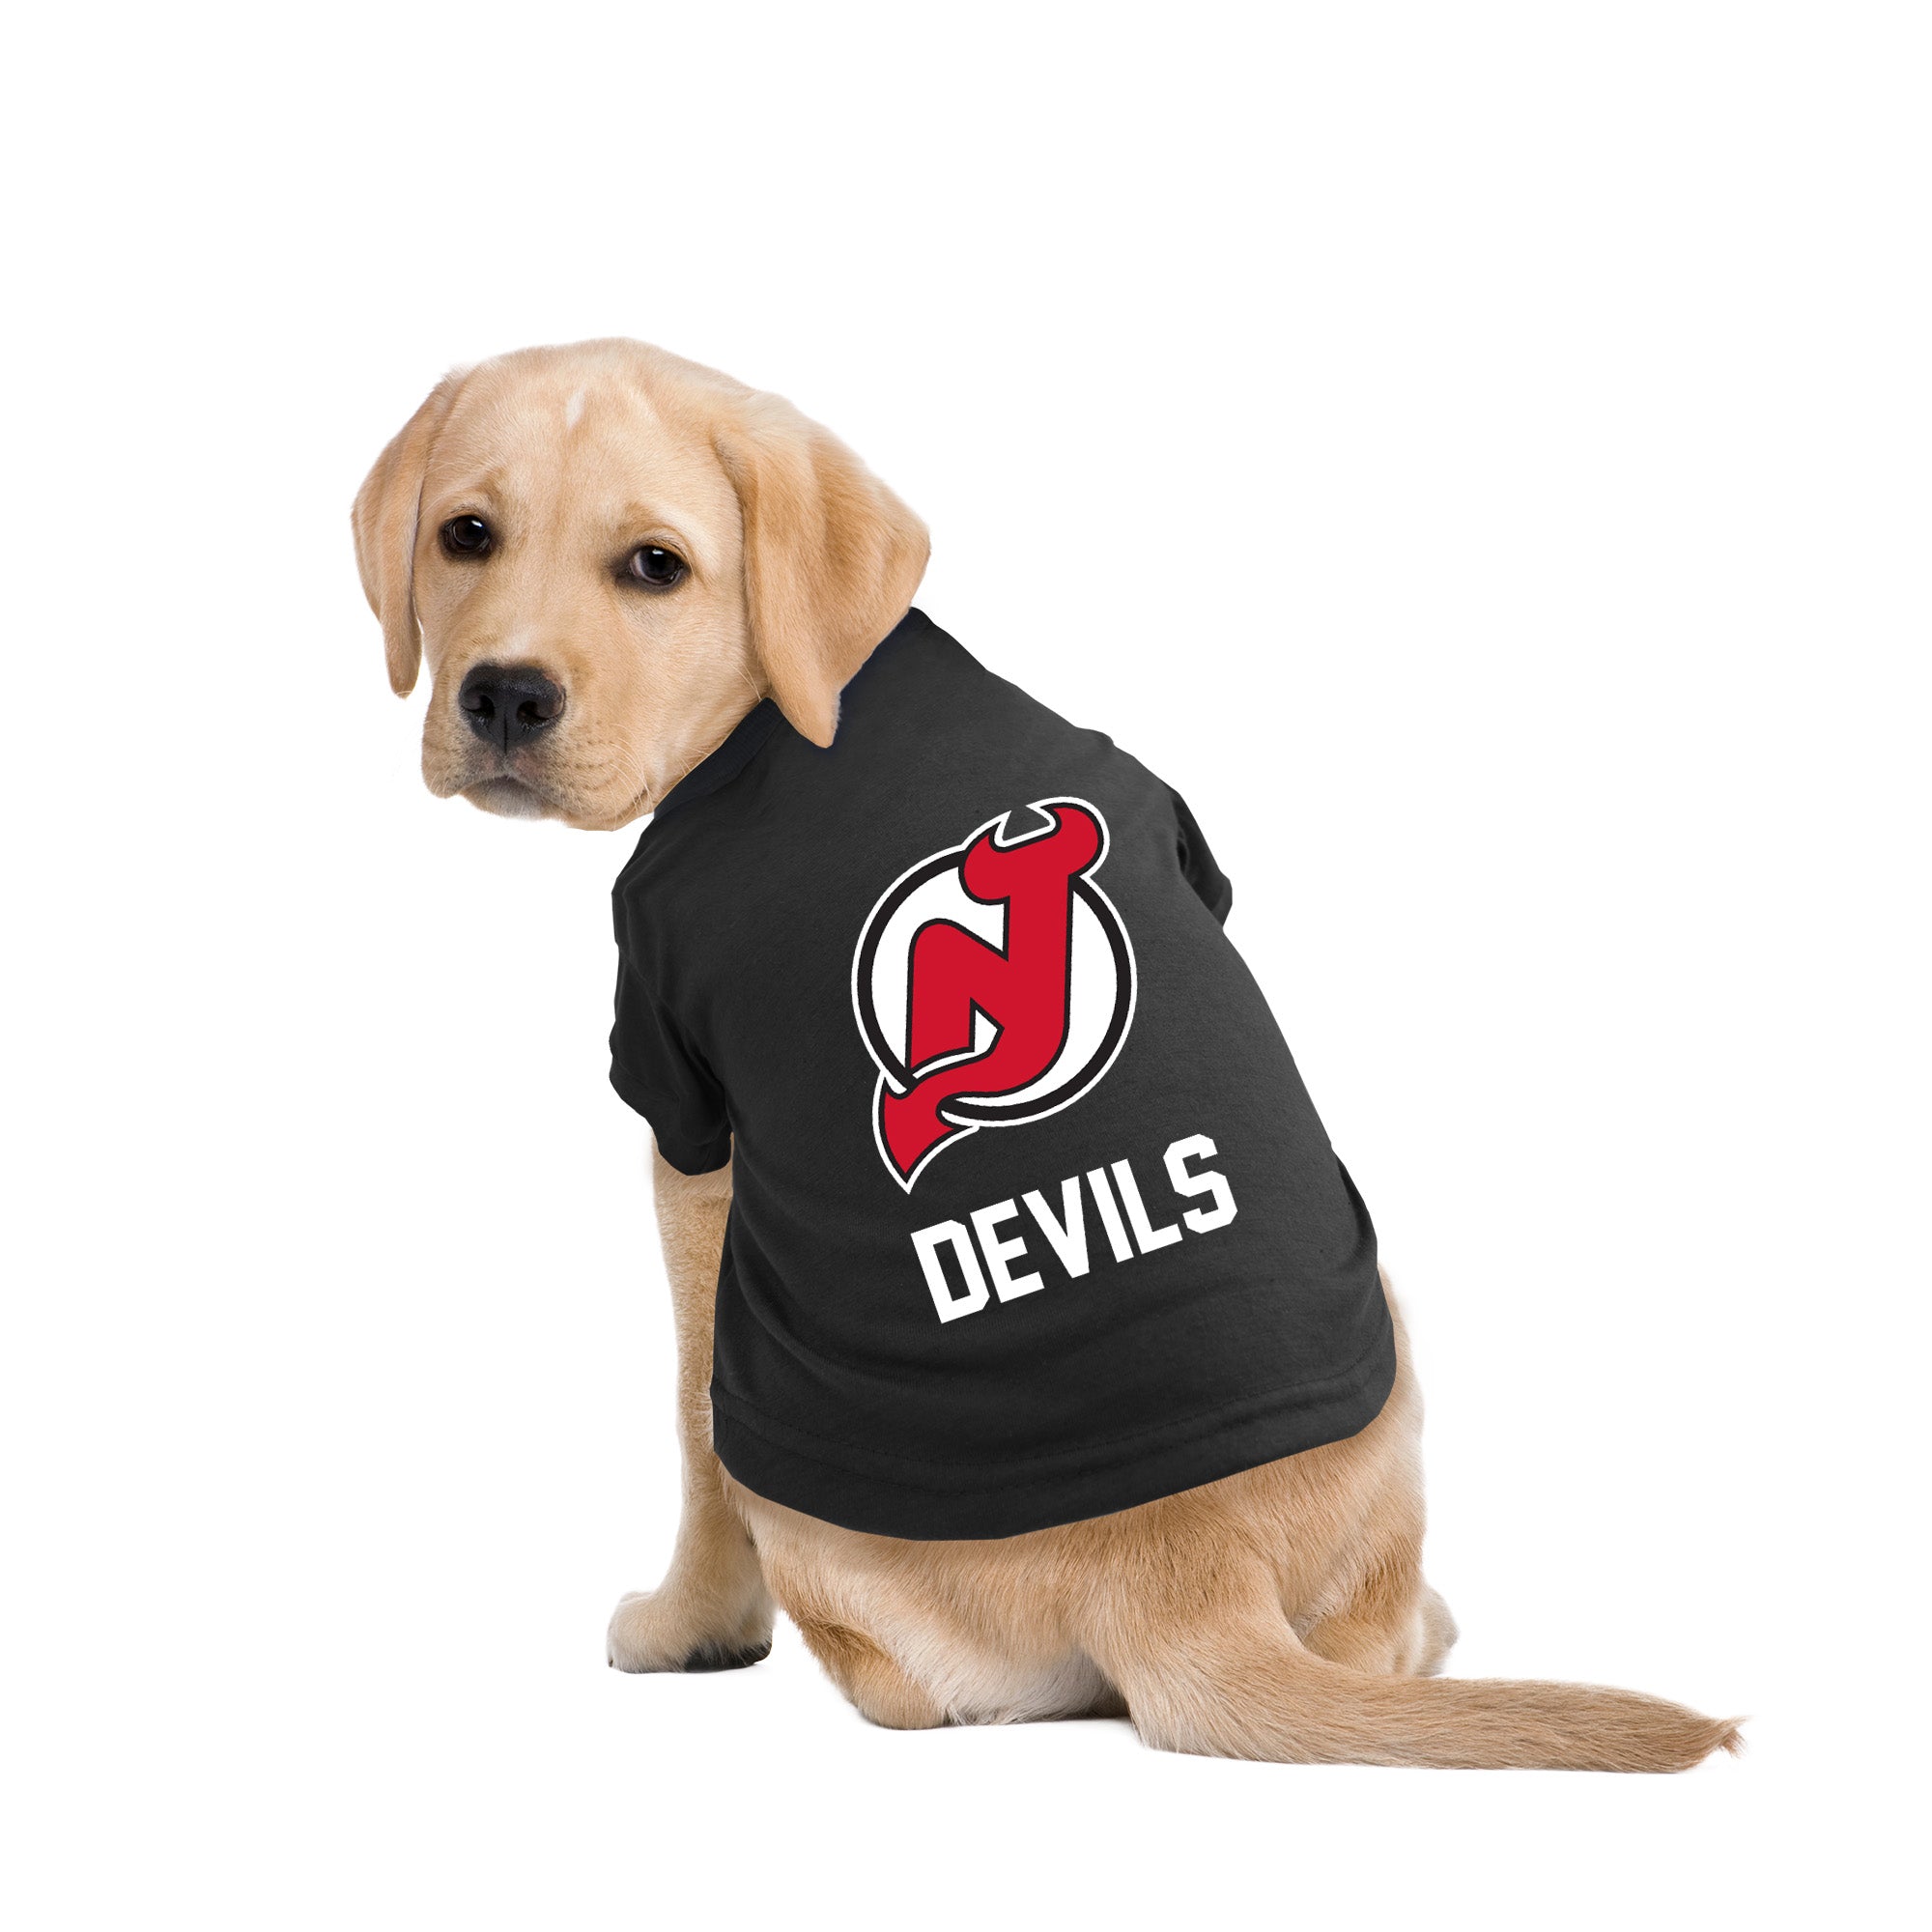 New Jersey Devils - Happy #NationalPetDay to our team dog, Barren